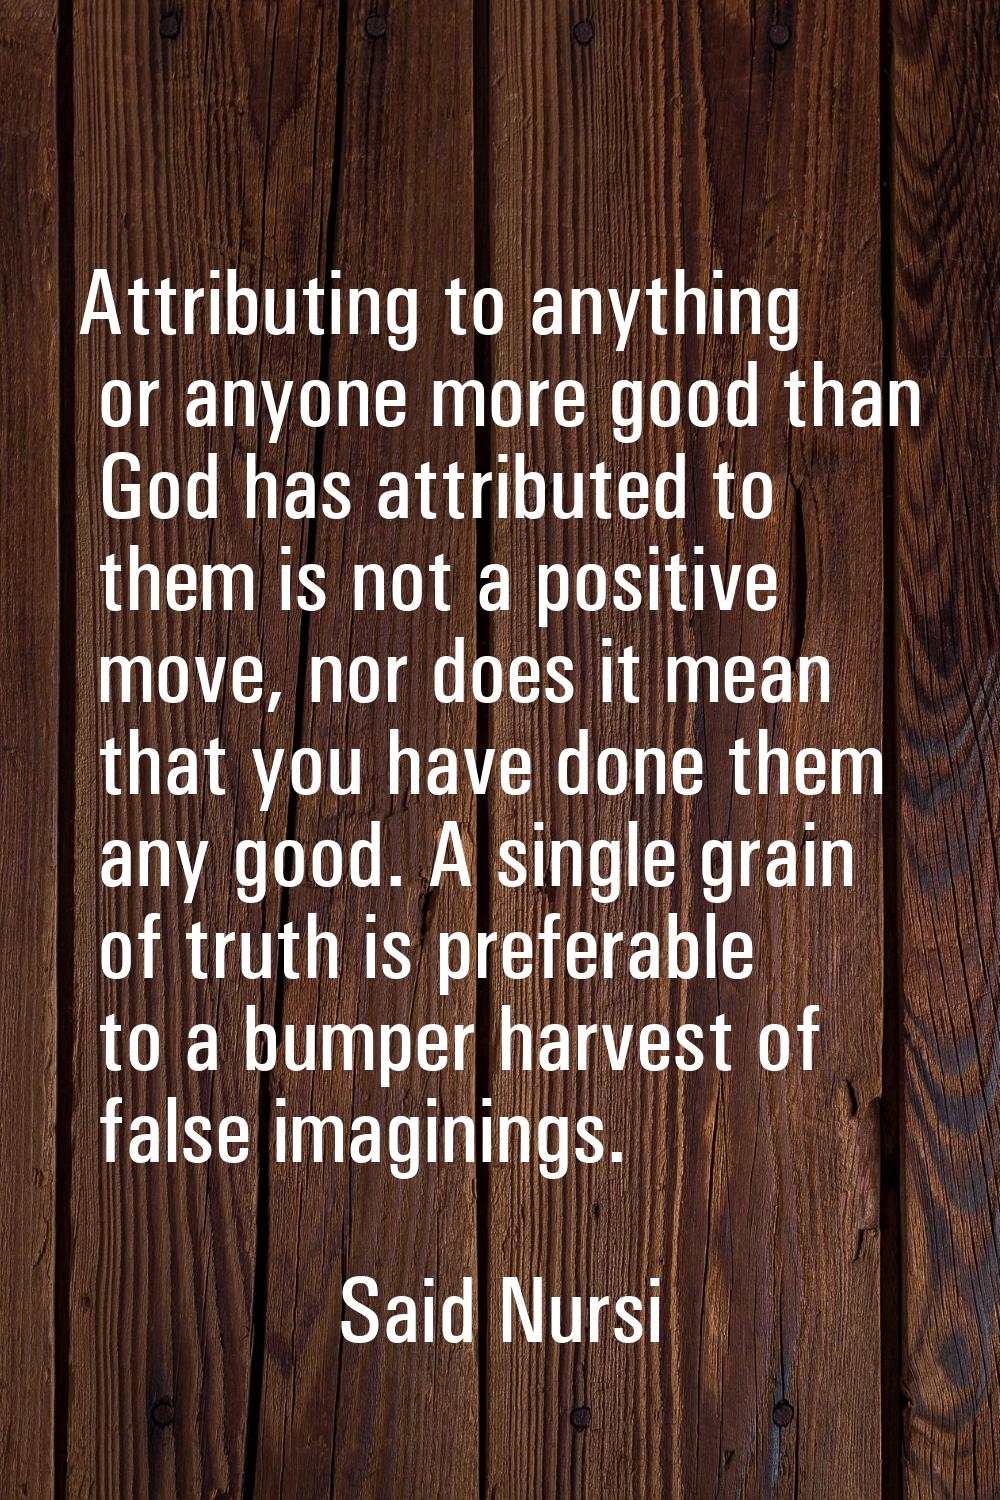 Attributing to anything or anyone more good than God has attributed to them is not a positive move,